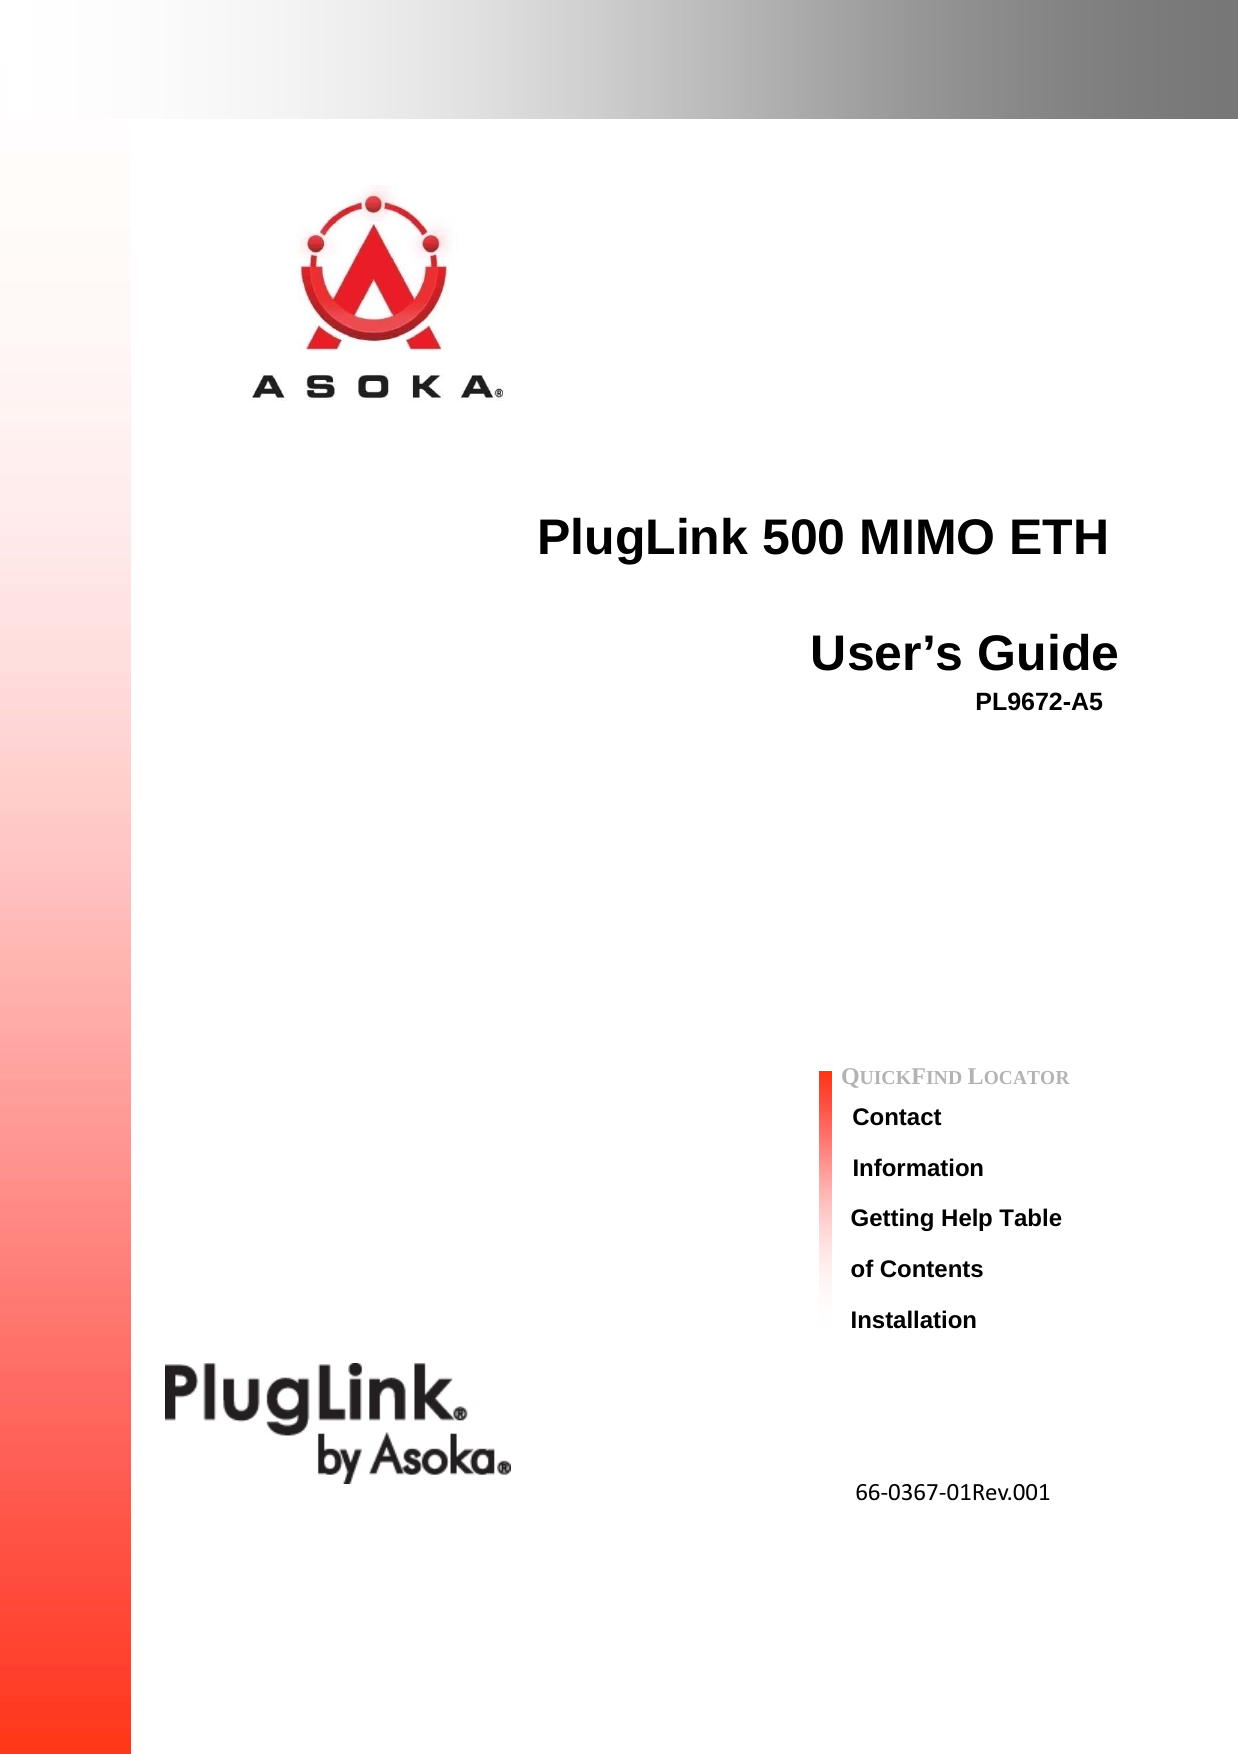        PlugLink 500 MIMO ETH                             User’s Guide         PL9672-A5                  QUICKFIND LOCATOR  Contact  Information Getting Help Table of Contents Installation        66‐0367‐01Rev.001